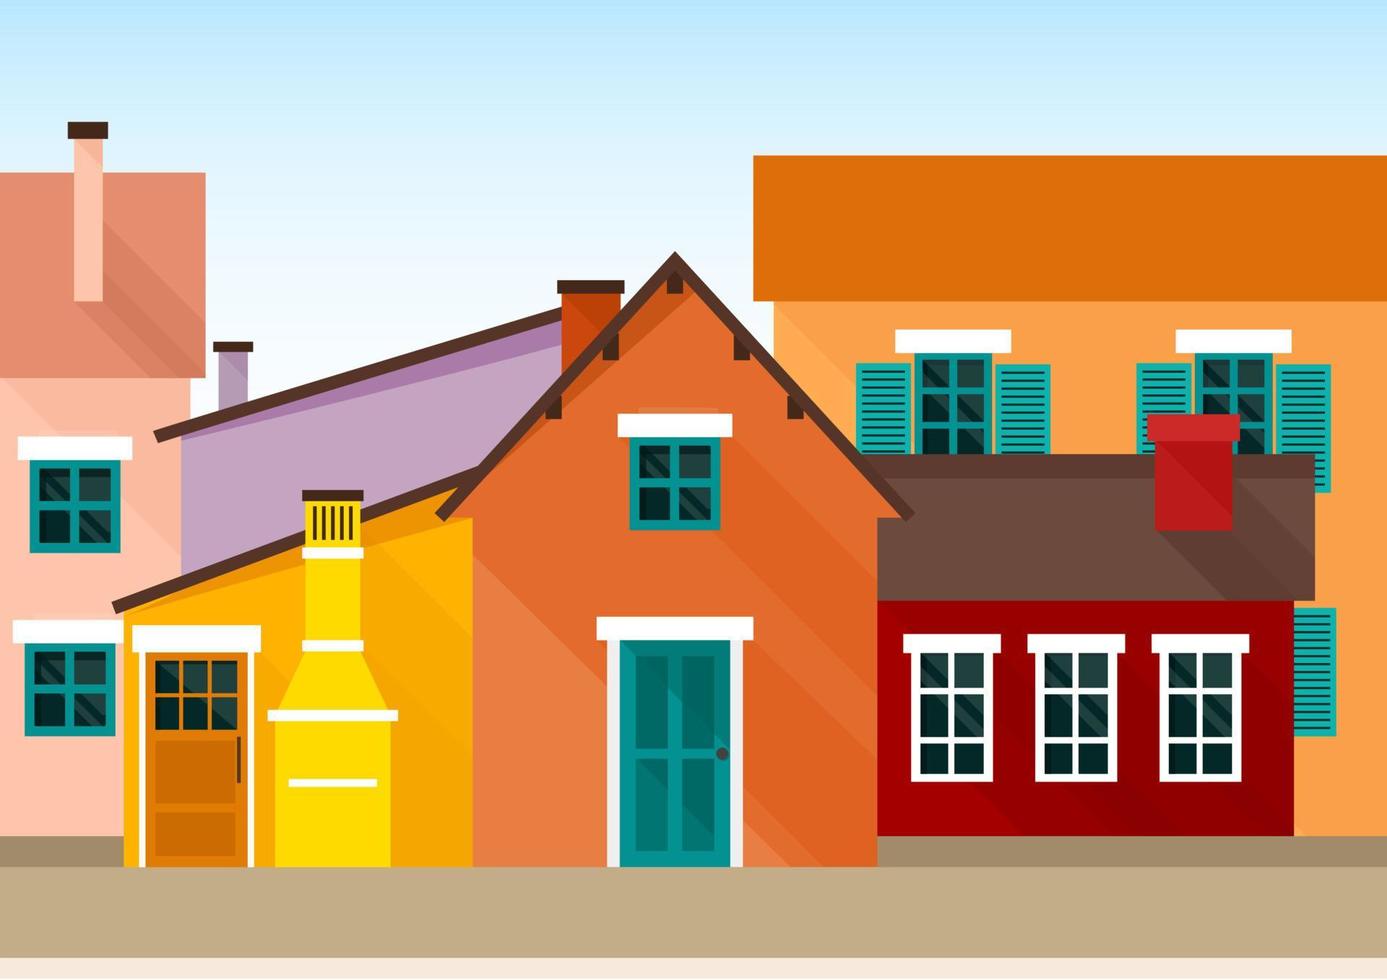 Cityscape of many bright yellow, red and orange Scandinavian style houses vector